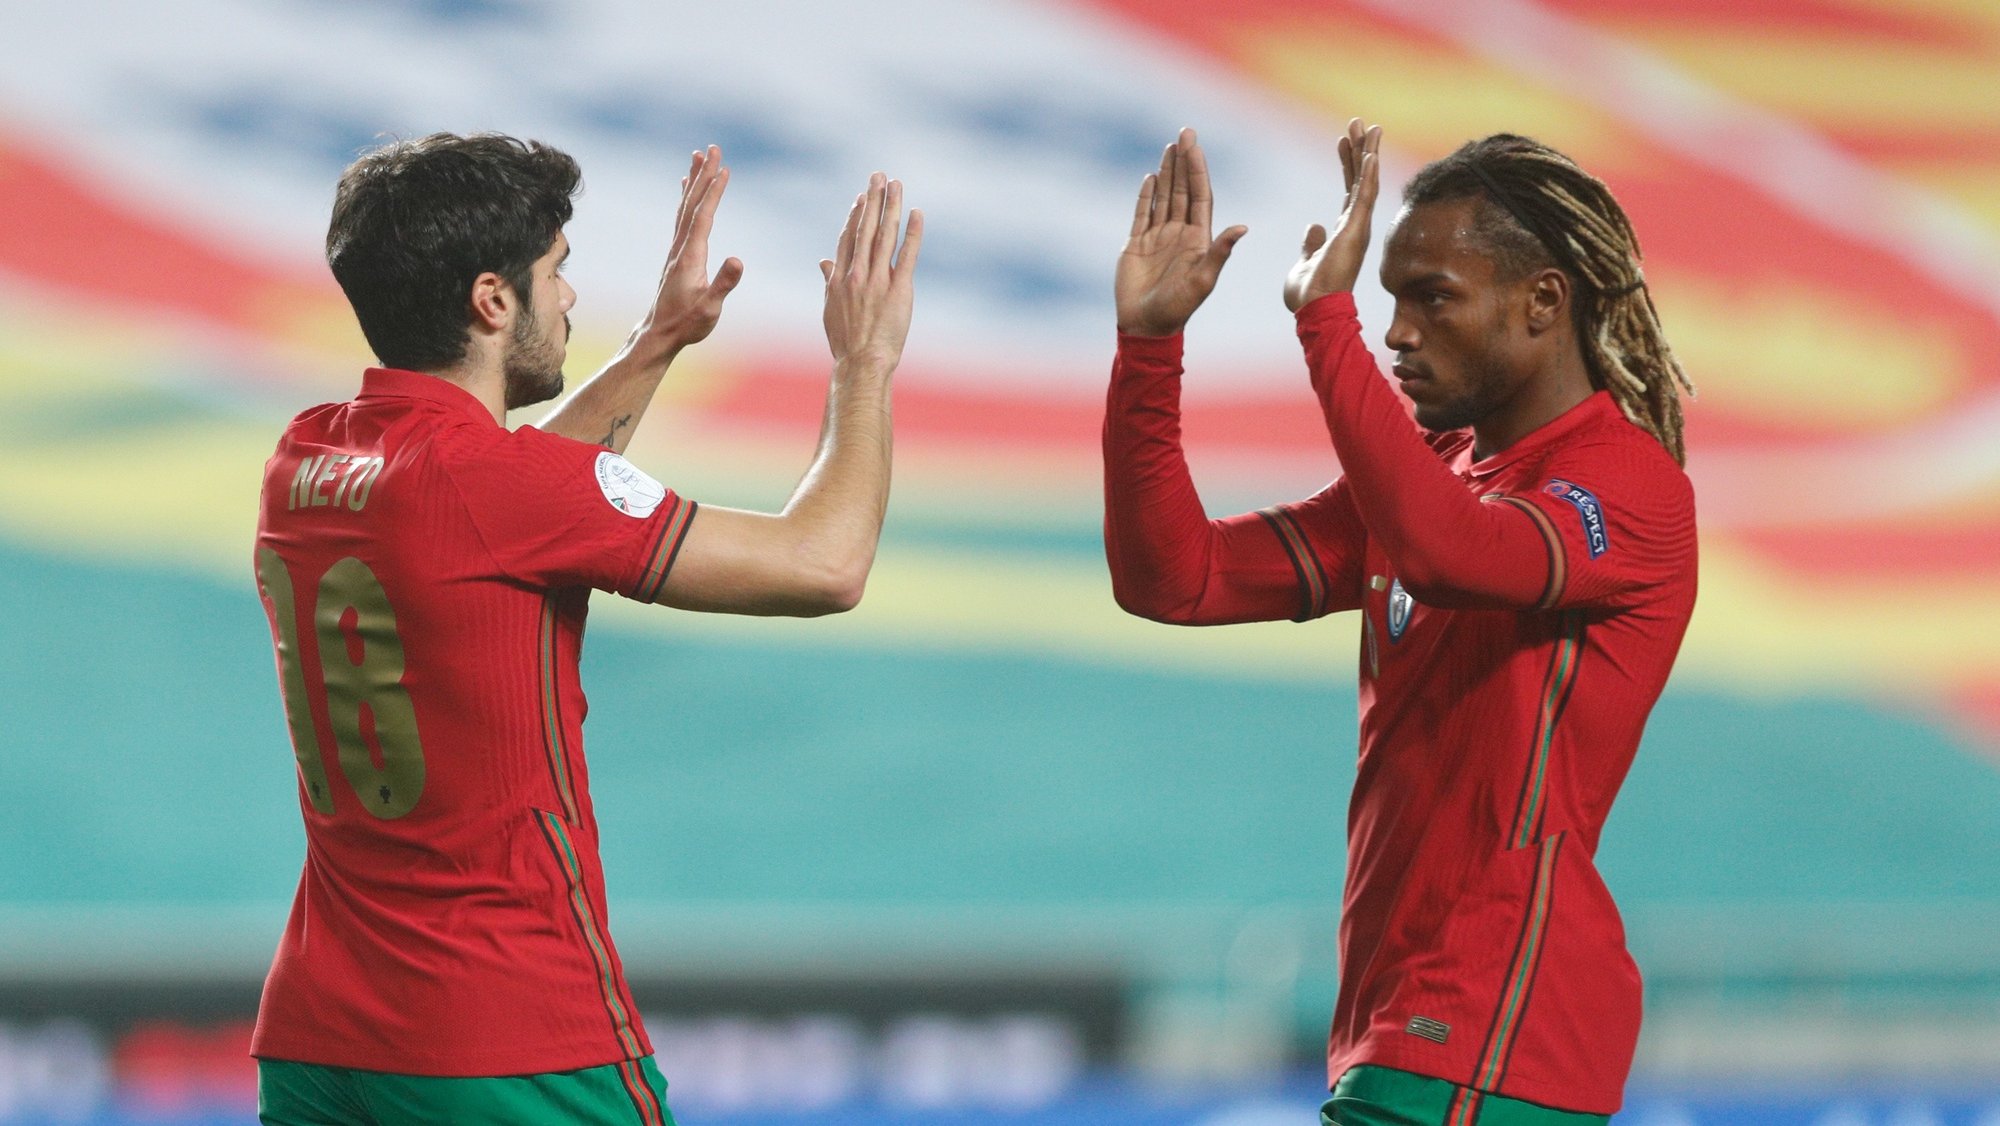 Portugal national team player Pedro Neto (L)  celebrates with Renato Sanches after scoring 1-0 lead during the friendly soccer match between Portugal and Andorra, held at Luz stadium in Lisbon, Portugal, 11 November 2020, ANTONIO COTRIM/LUSA